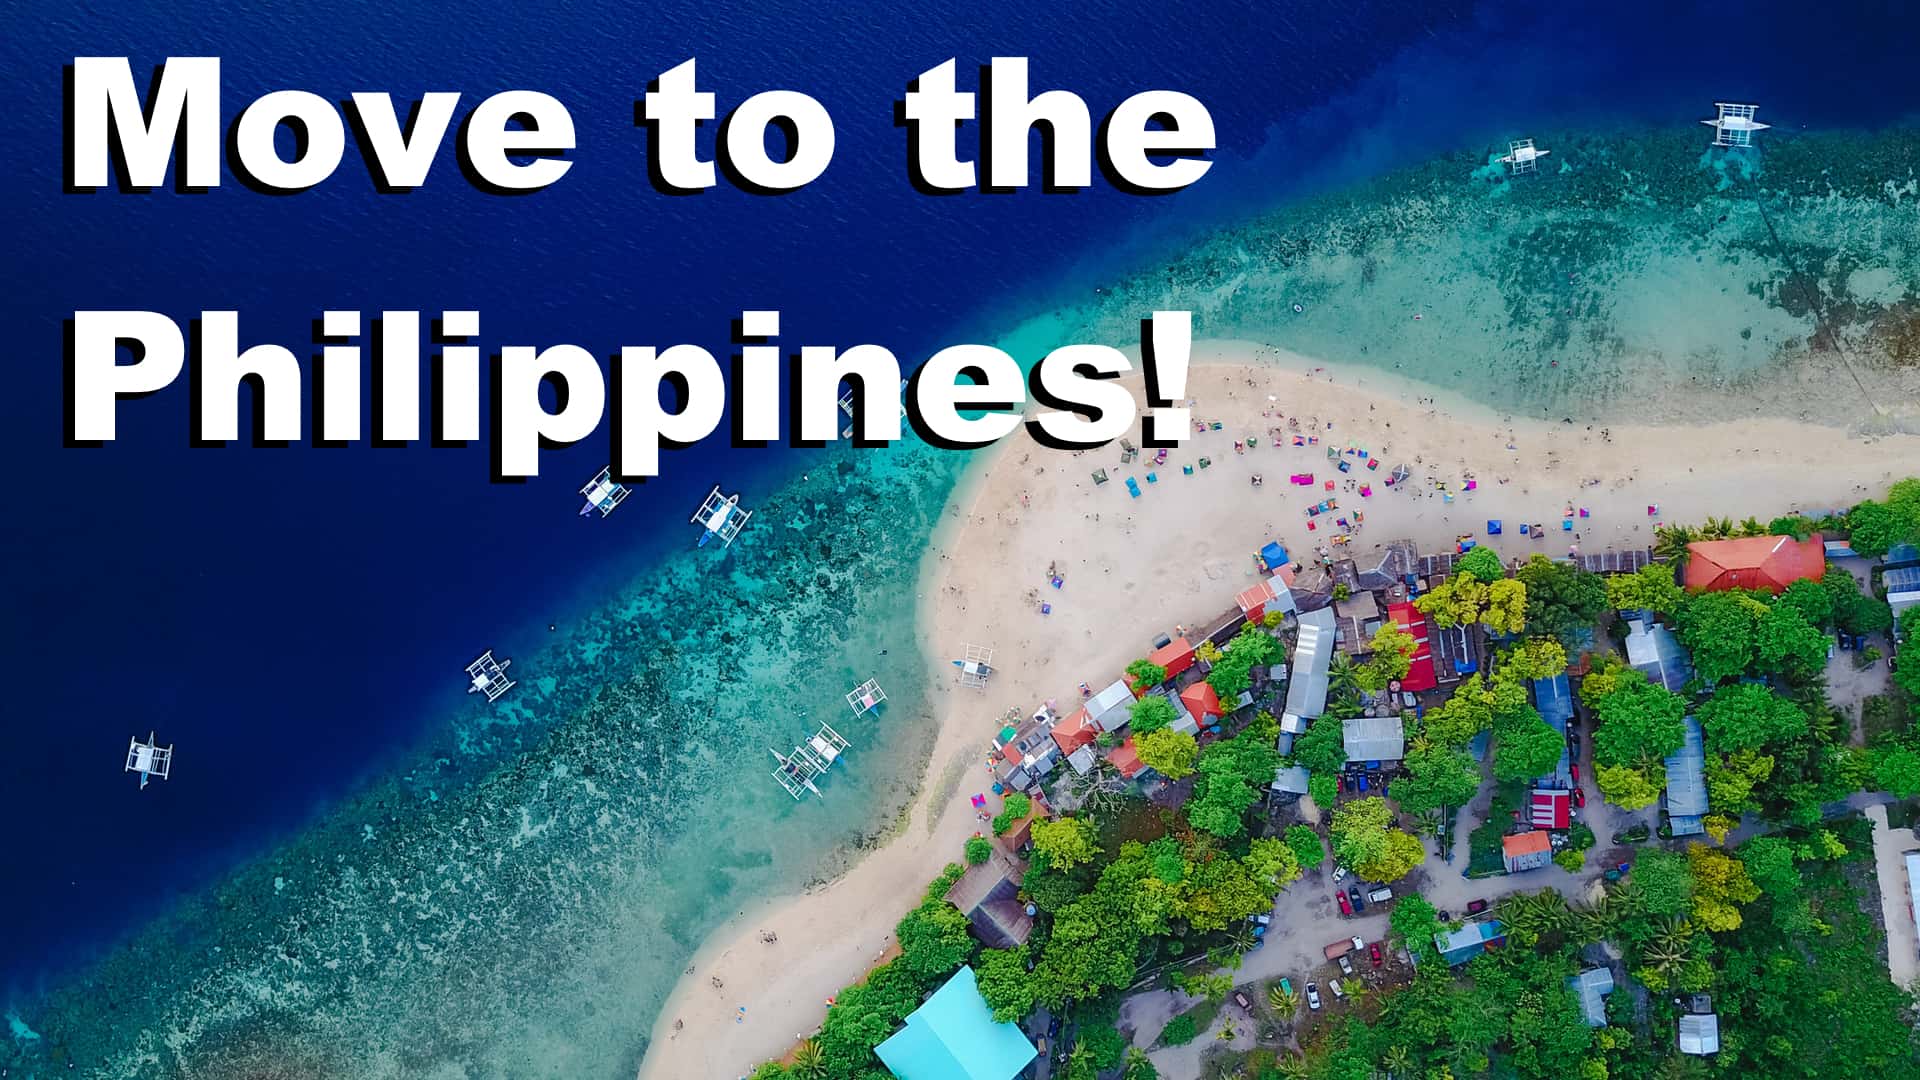 Move to the Philippines